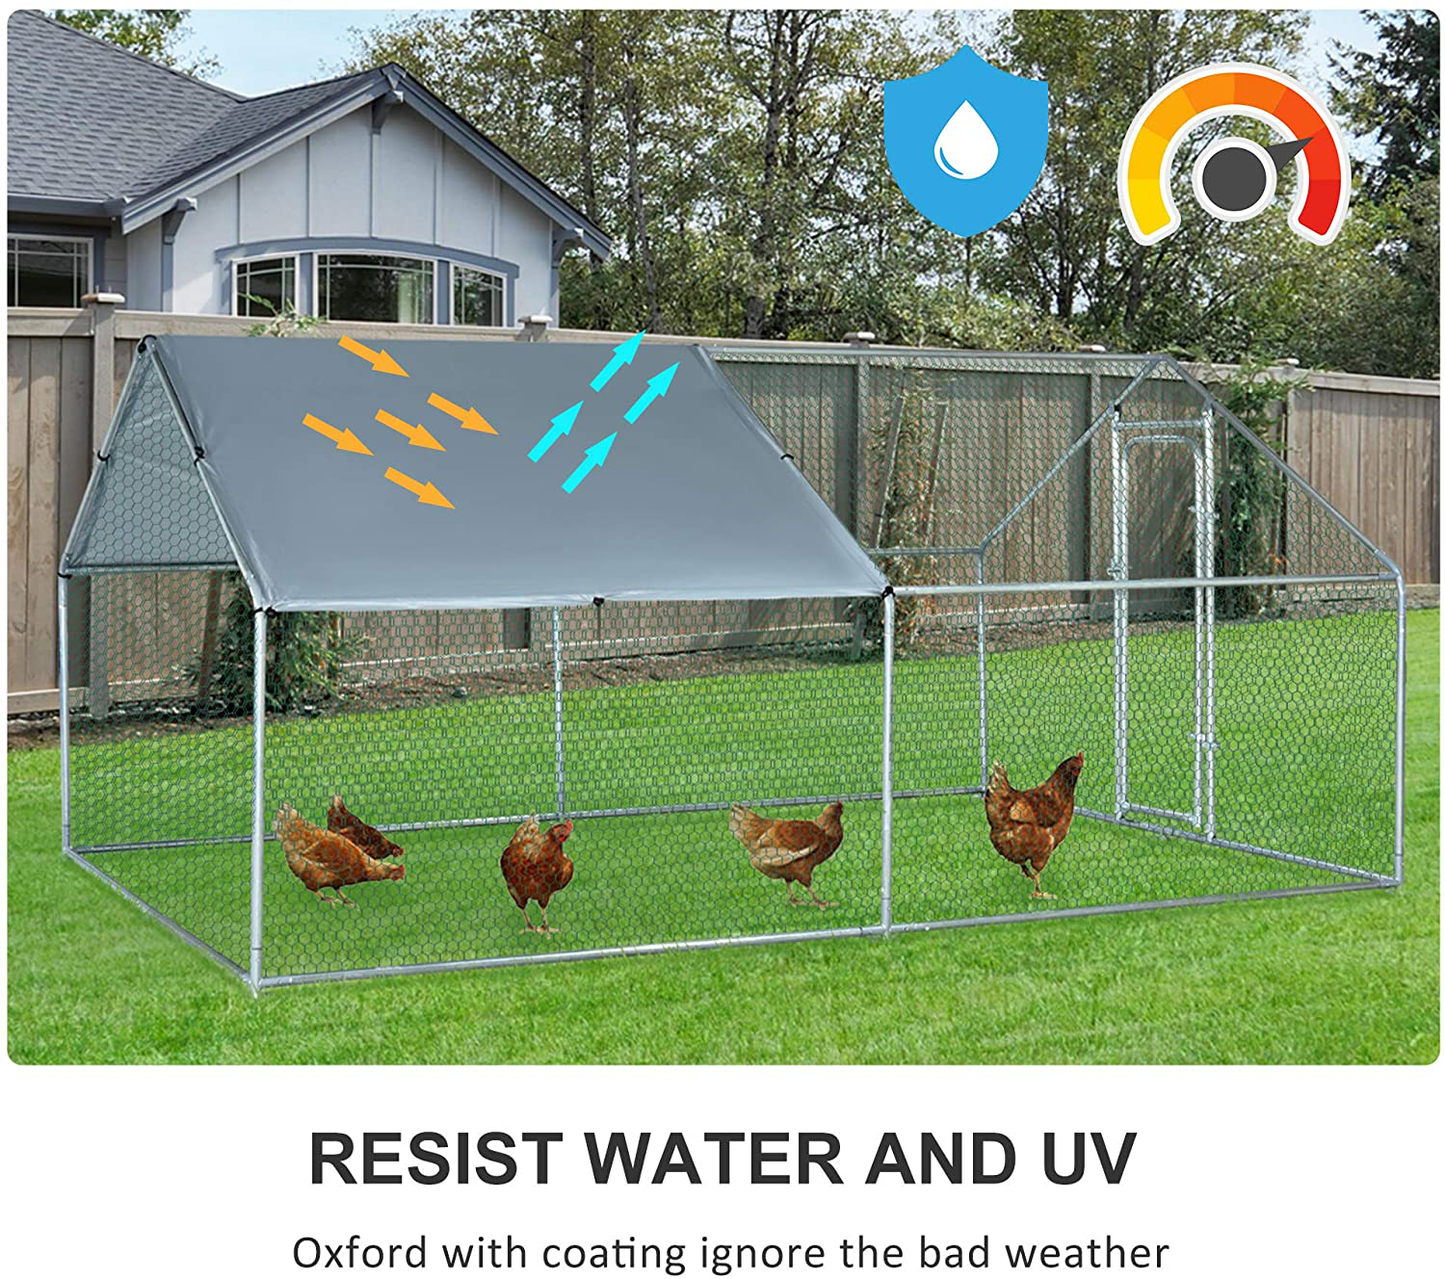 Pawhut Galvanized Large Metal Chicken Coop Cage Walk-In Enclosure Poultry Hen Run House Playpen Rabbit Hutch UV & Water Resistant Cover for Outdoor Backyard